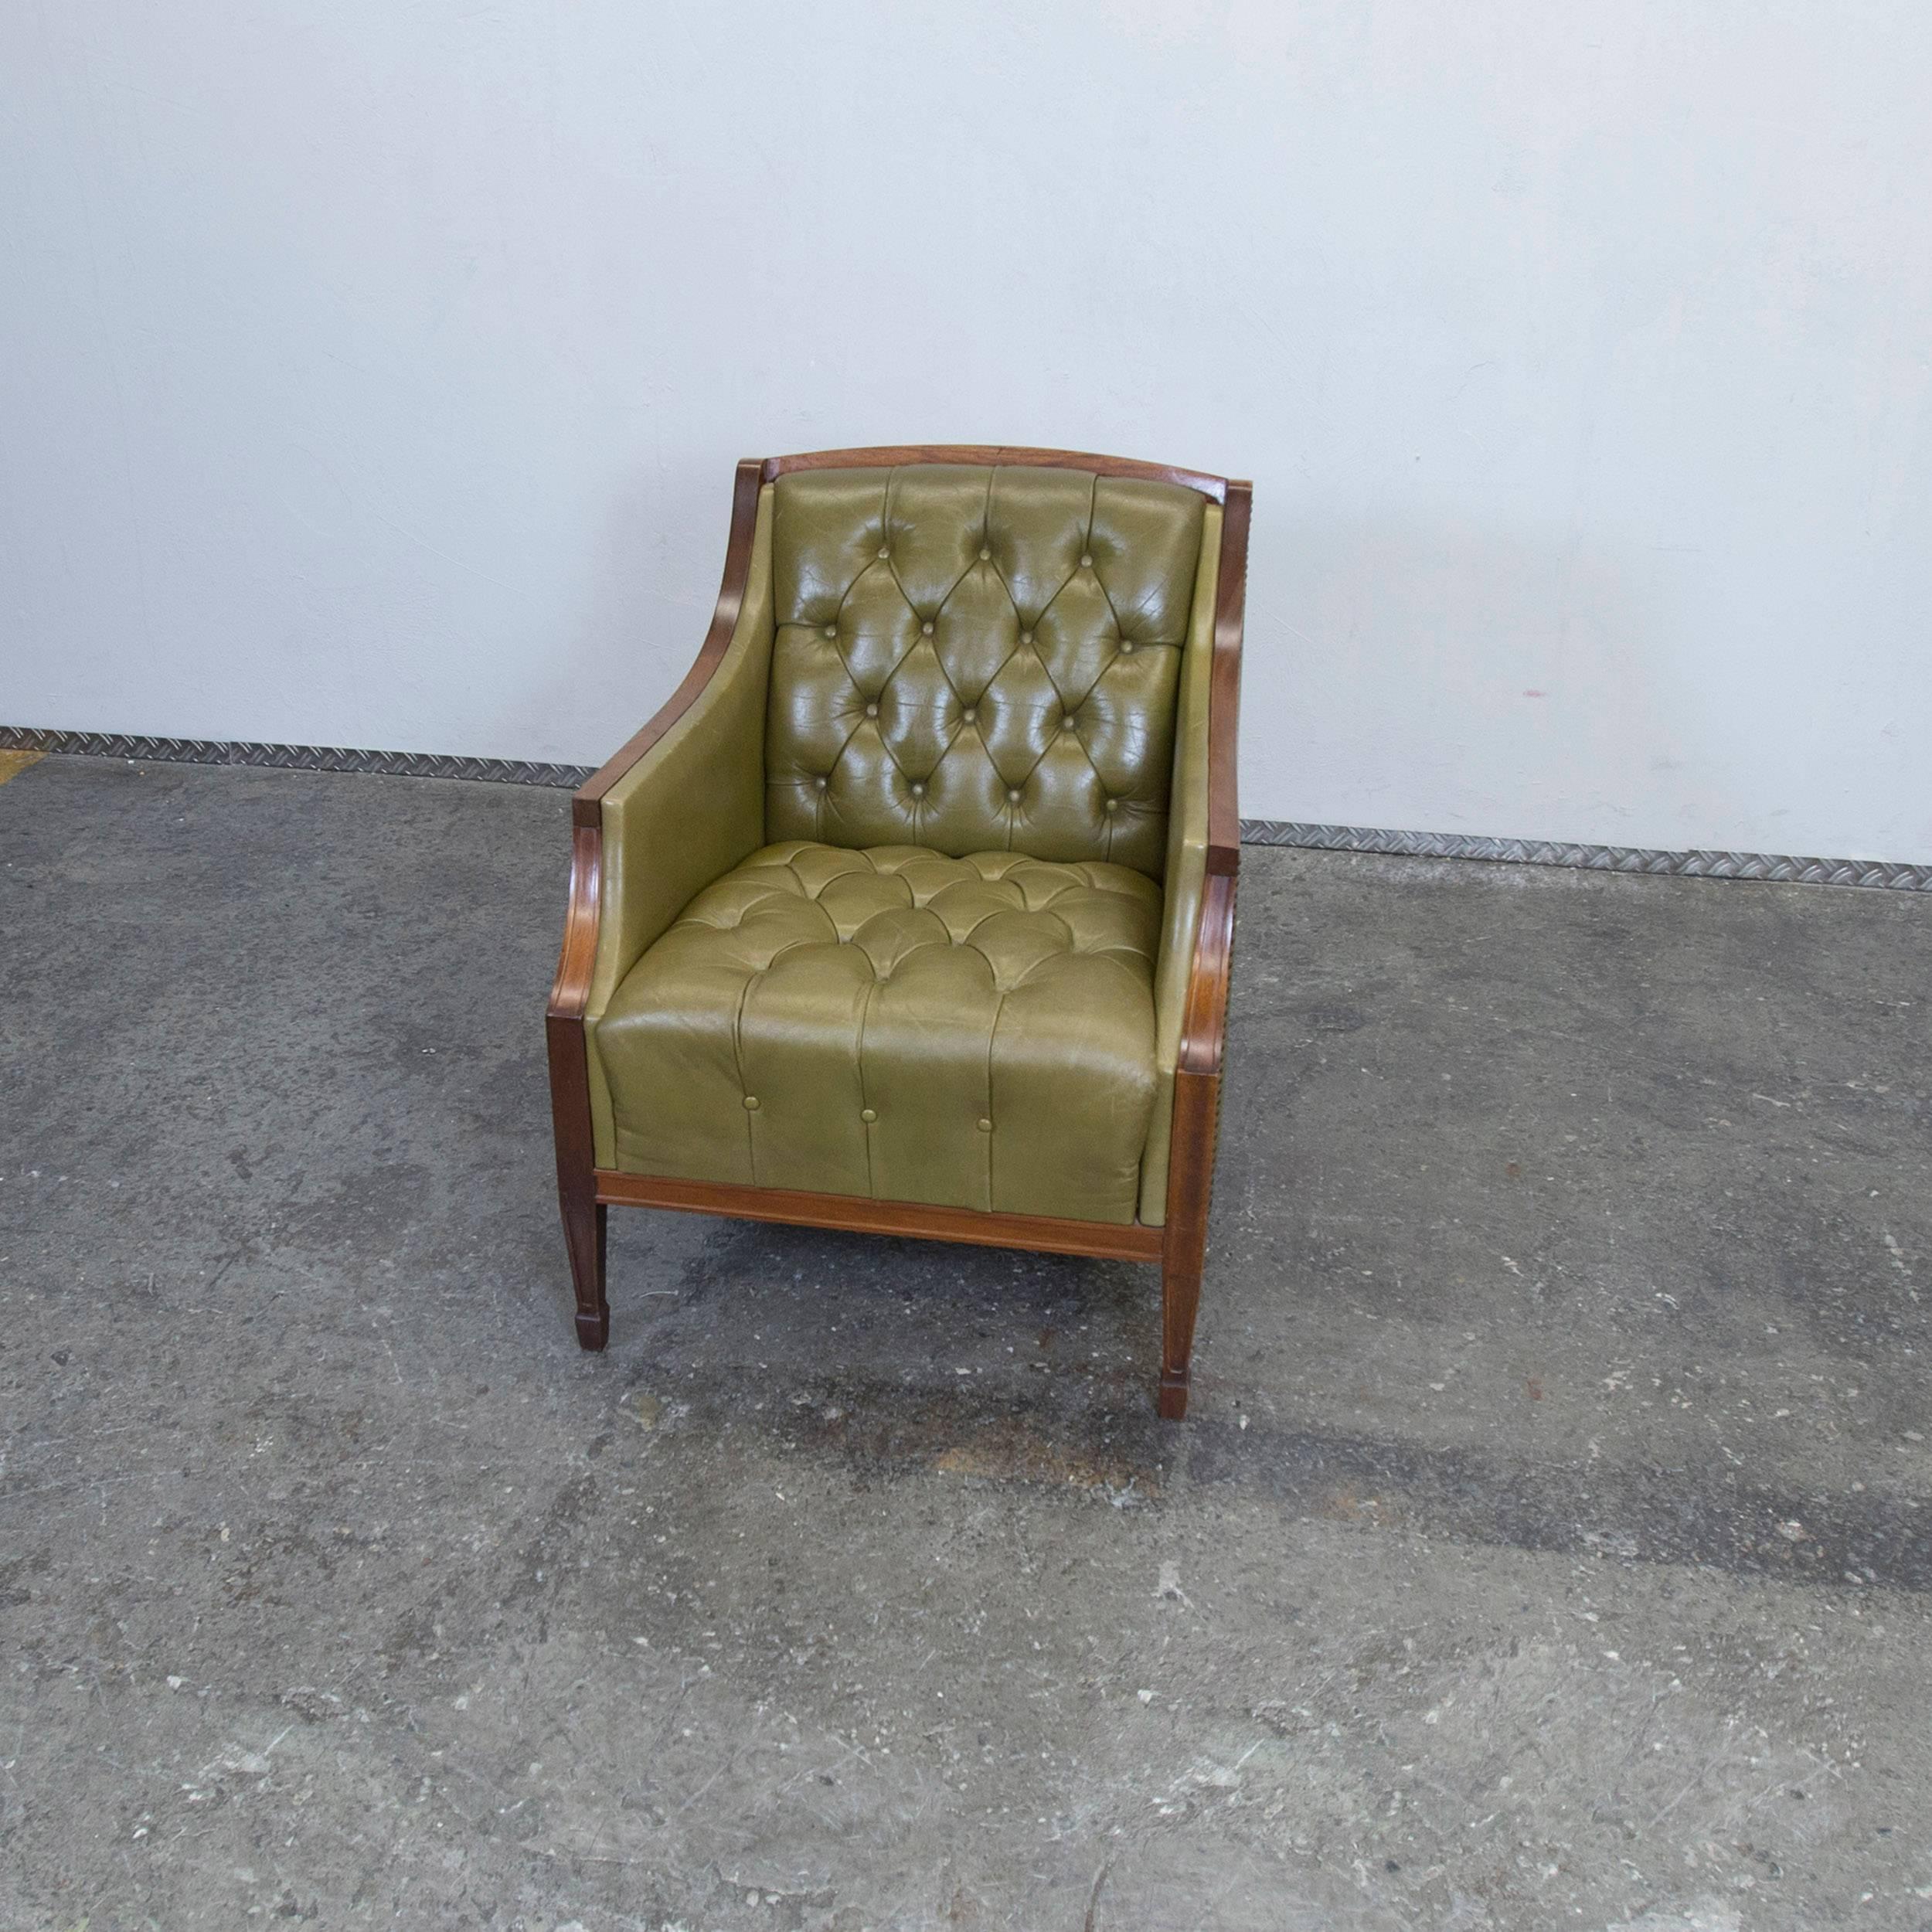 British Chesterfield Leather Armchair Green One-Seat Chair Vintage Retro